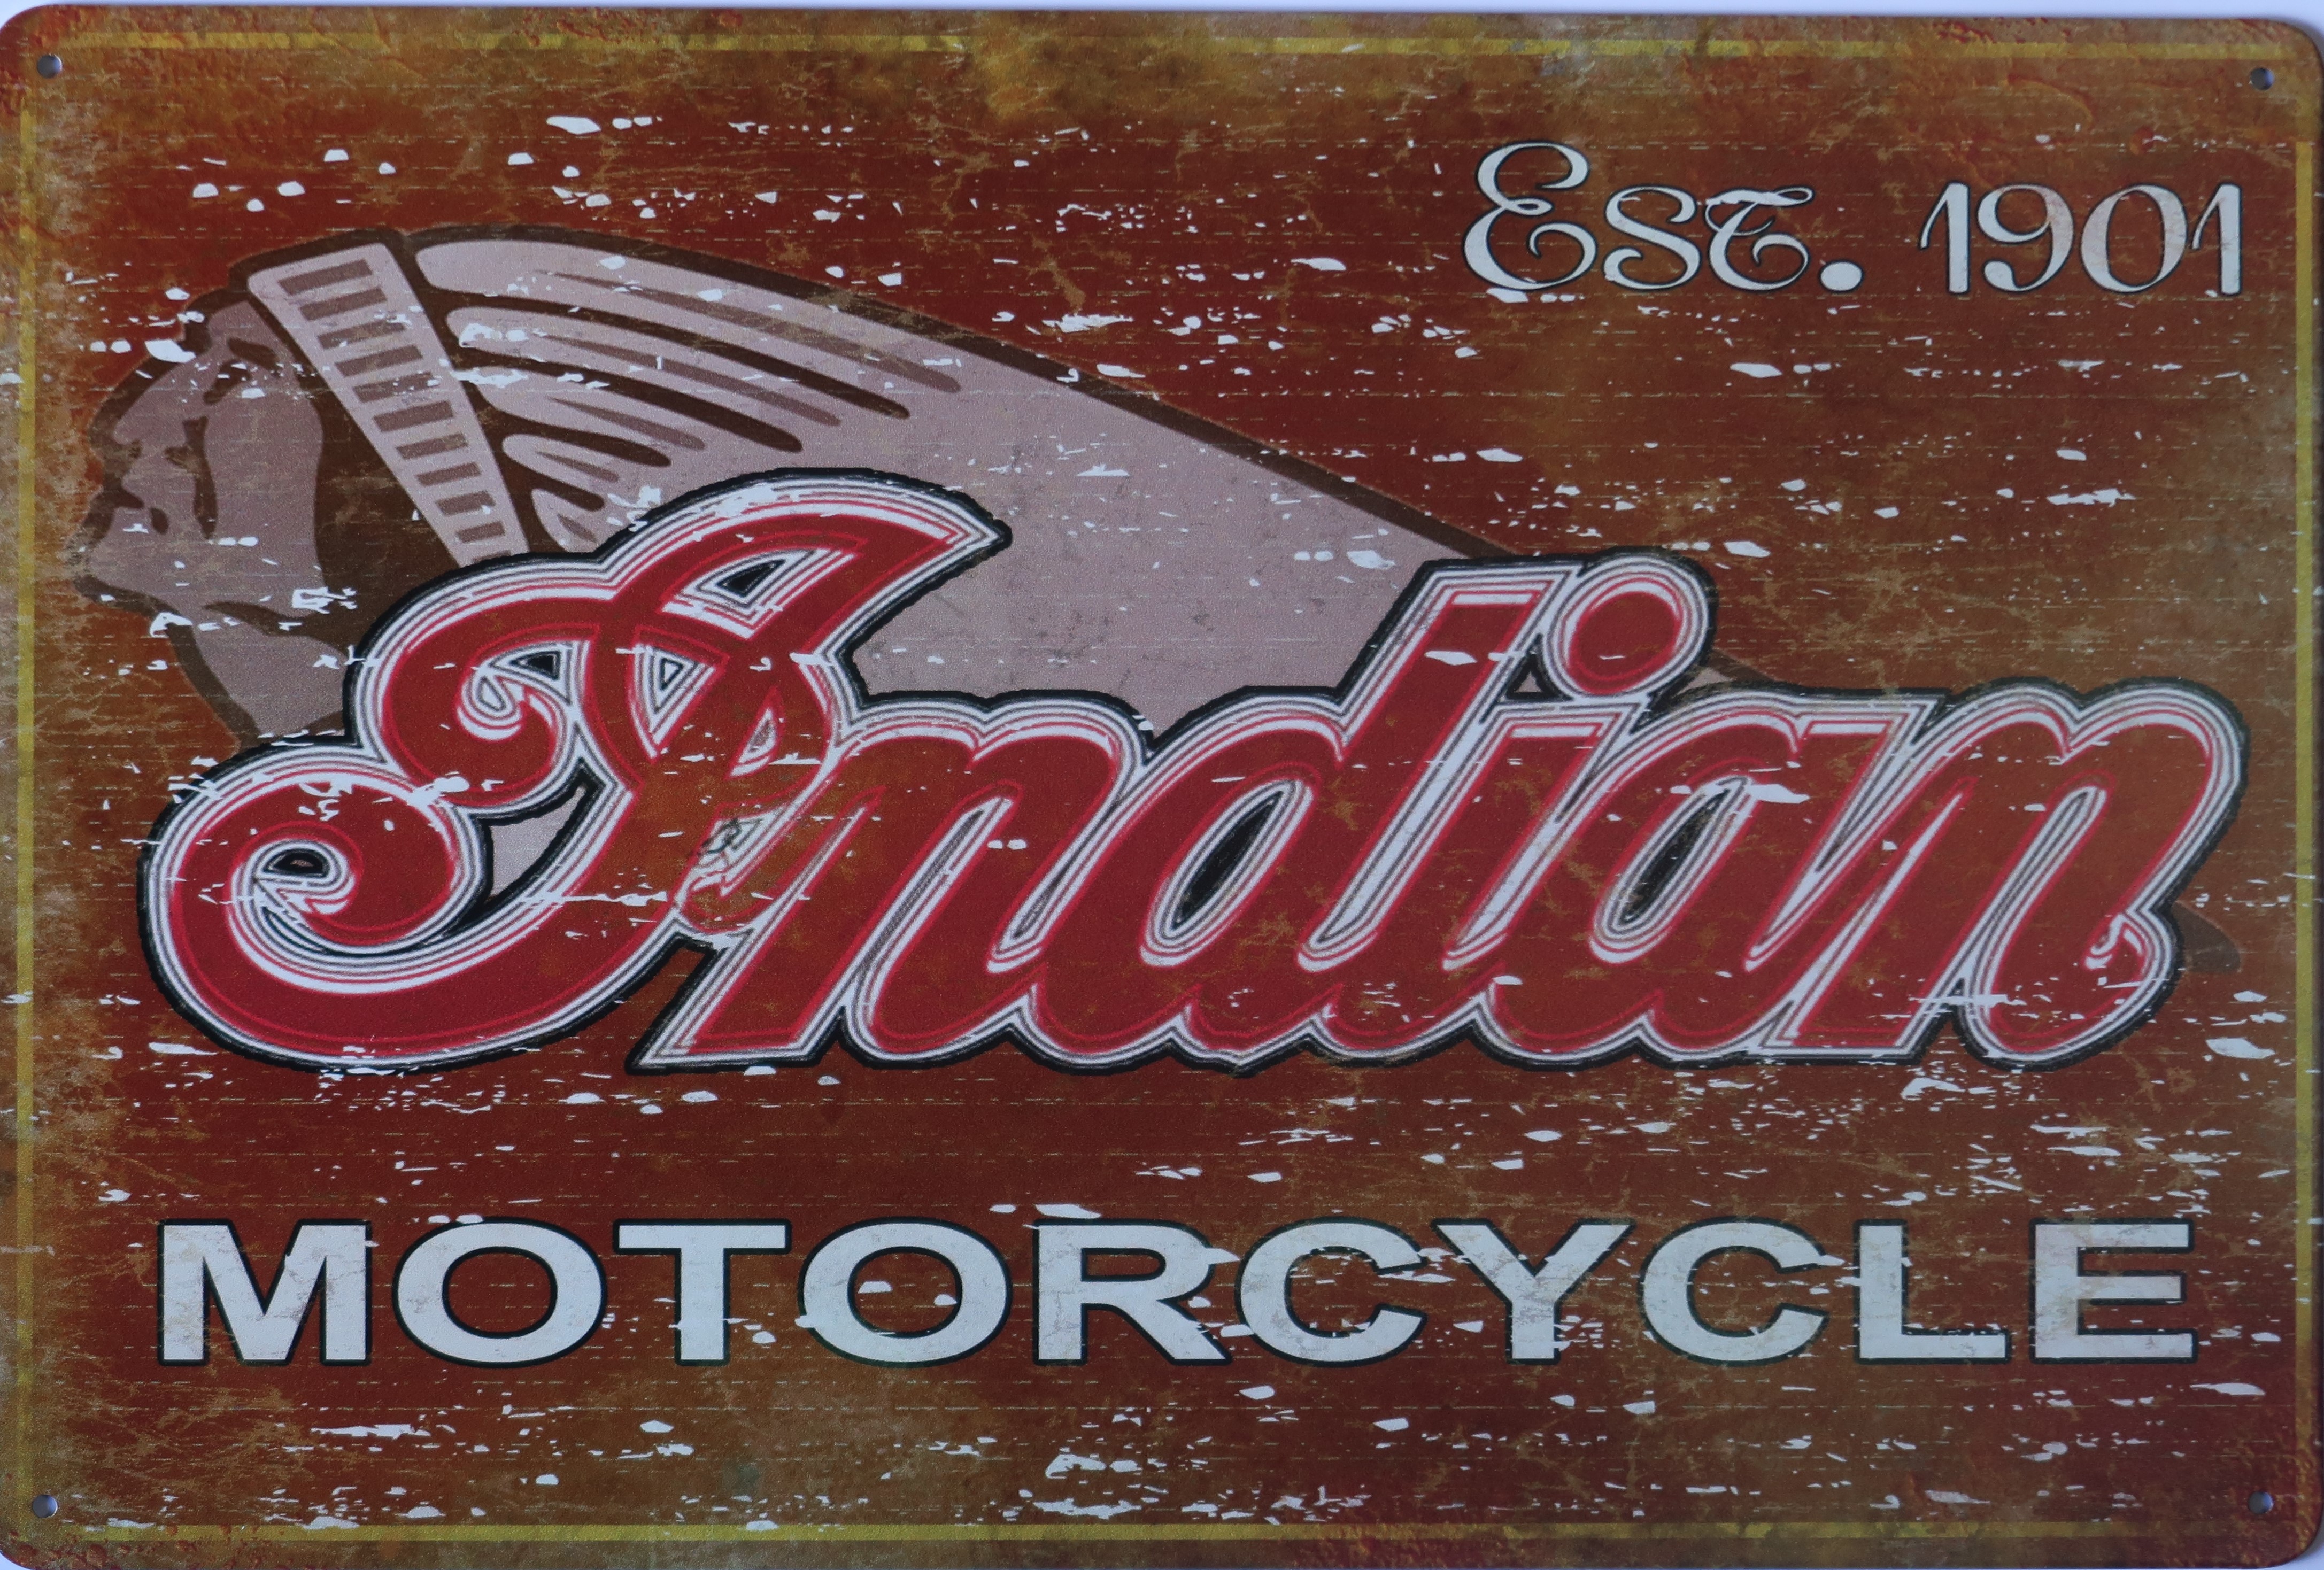 Indian Motorcycle Aluminium Garage Art Metal Vintage Sign 30cm x 20cm - 12 Inches x 8 Inches